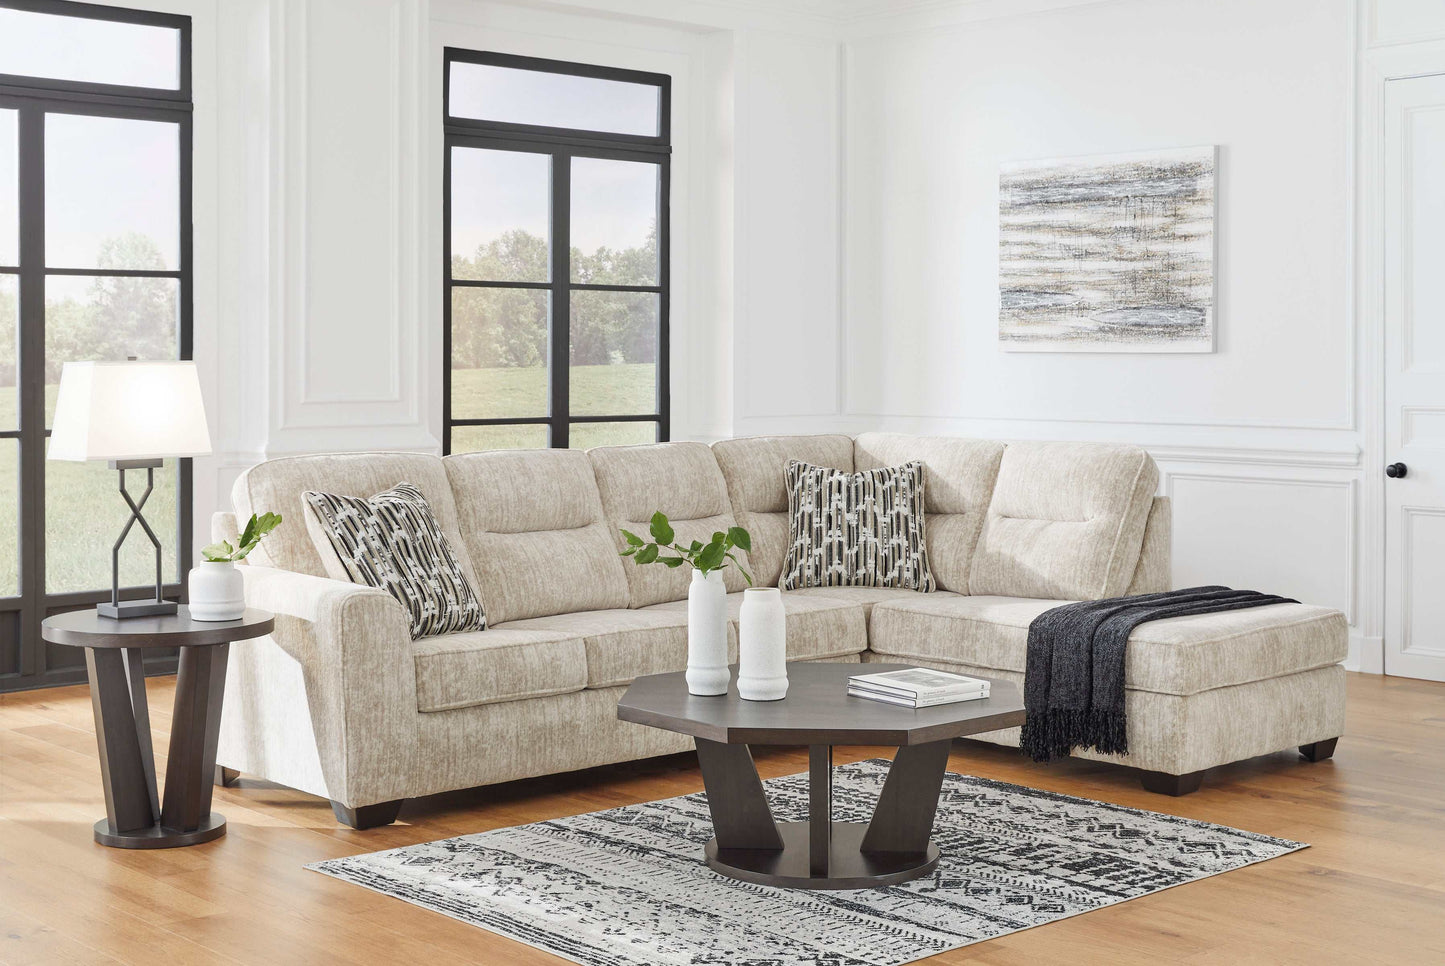 Lonoke Parchment 2pc RAF Chaise Sectional